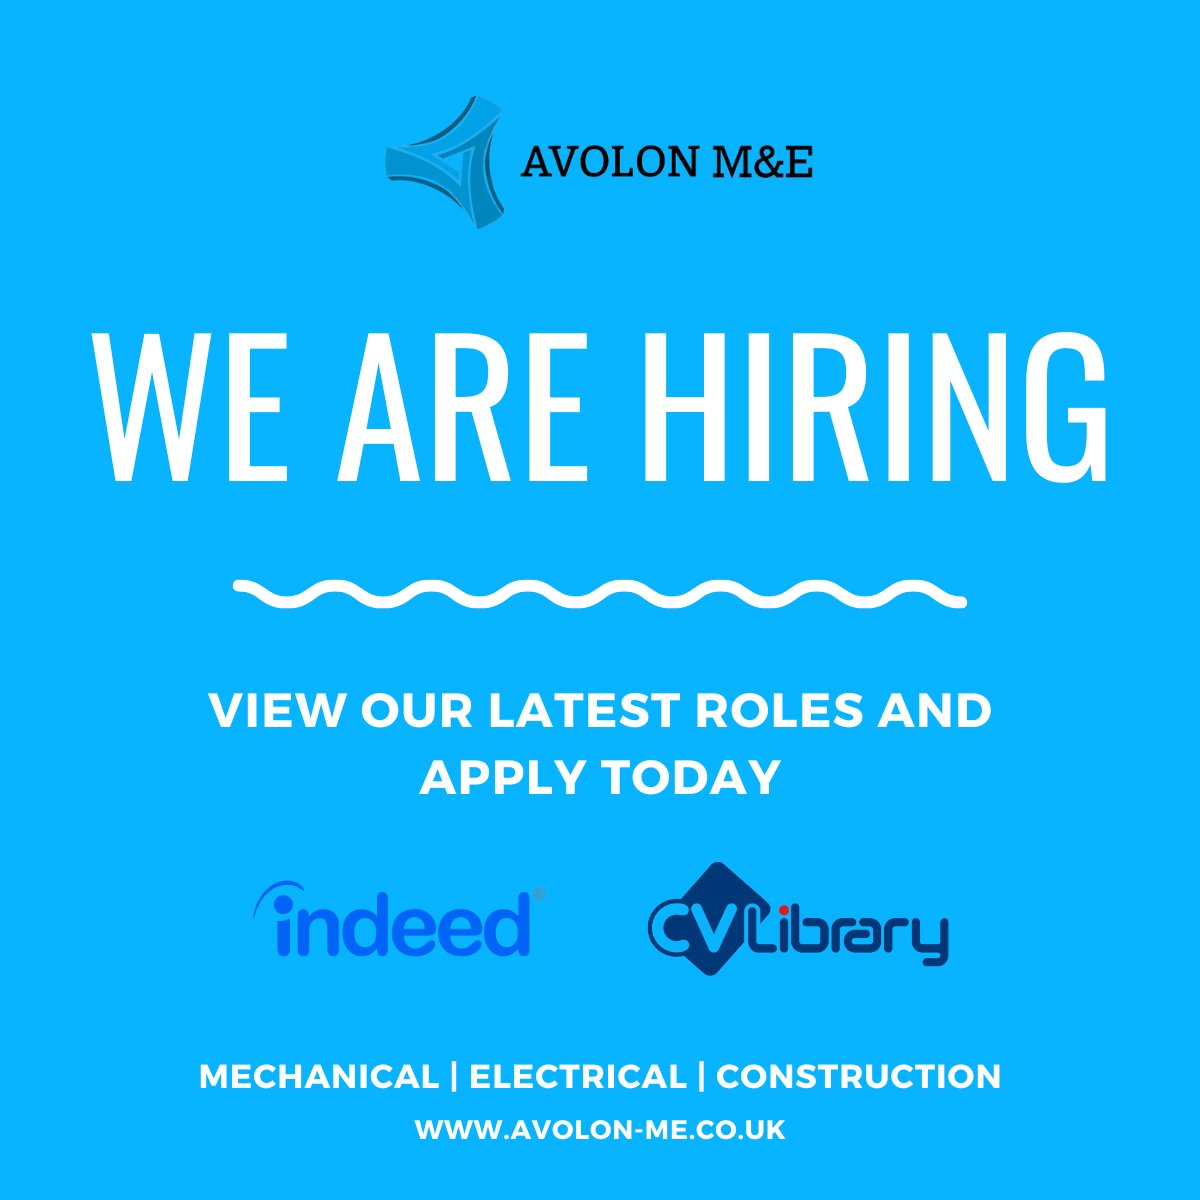 Our teams are recruiting for temporary & permanent positions across the UK with some of the country's leading contractors & subcontractors. Give the office a call on 01273 034970 or submit aCV today! 📧 info@avolon-me.co.uk 📧 executivesearch@avolon-me.co.uk #WeAreAvolon